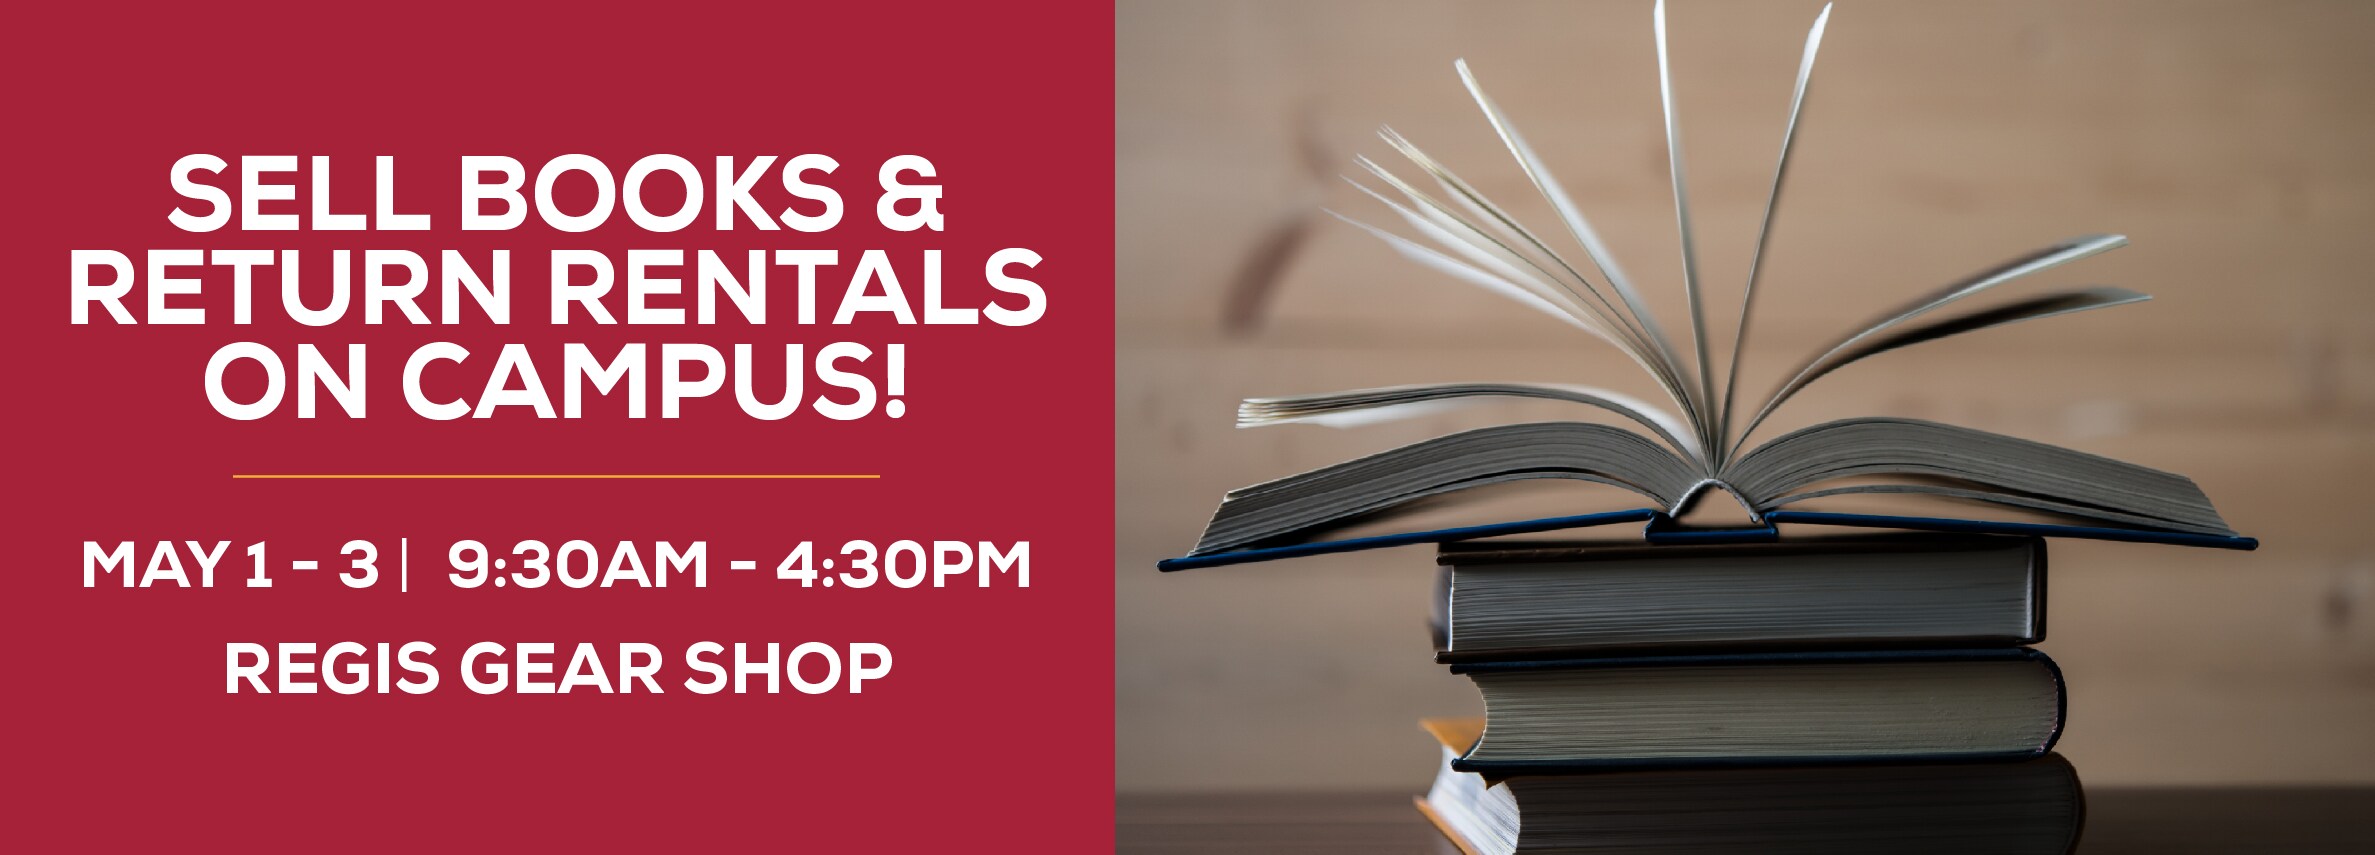 Sell Books & Return Rentals On Campus! May 1 - 3 from 9:30AM to 4:30PM. Located at the Regis College Gear Shop.